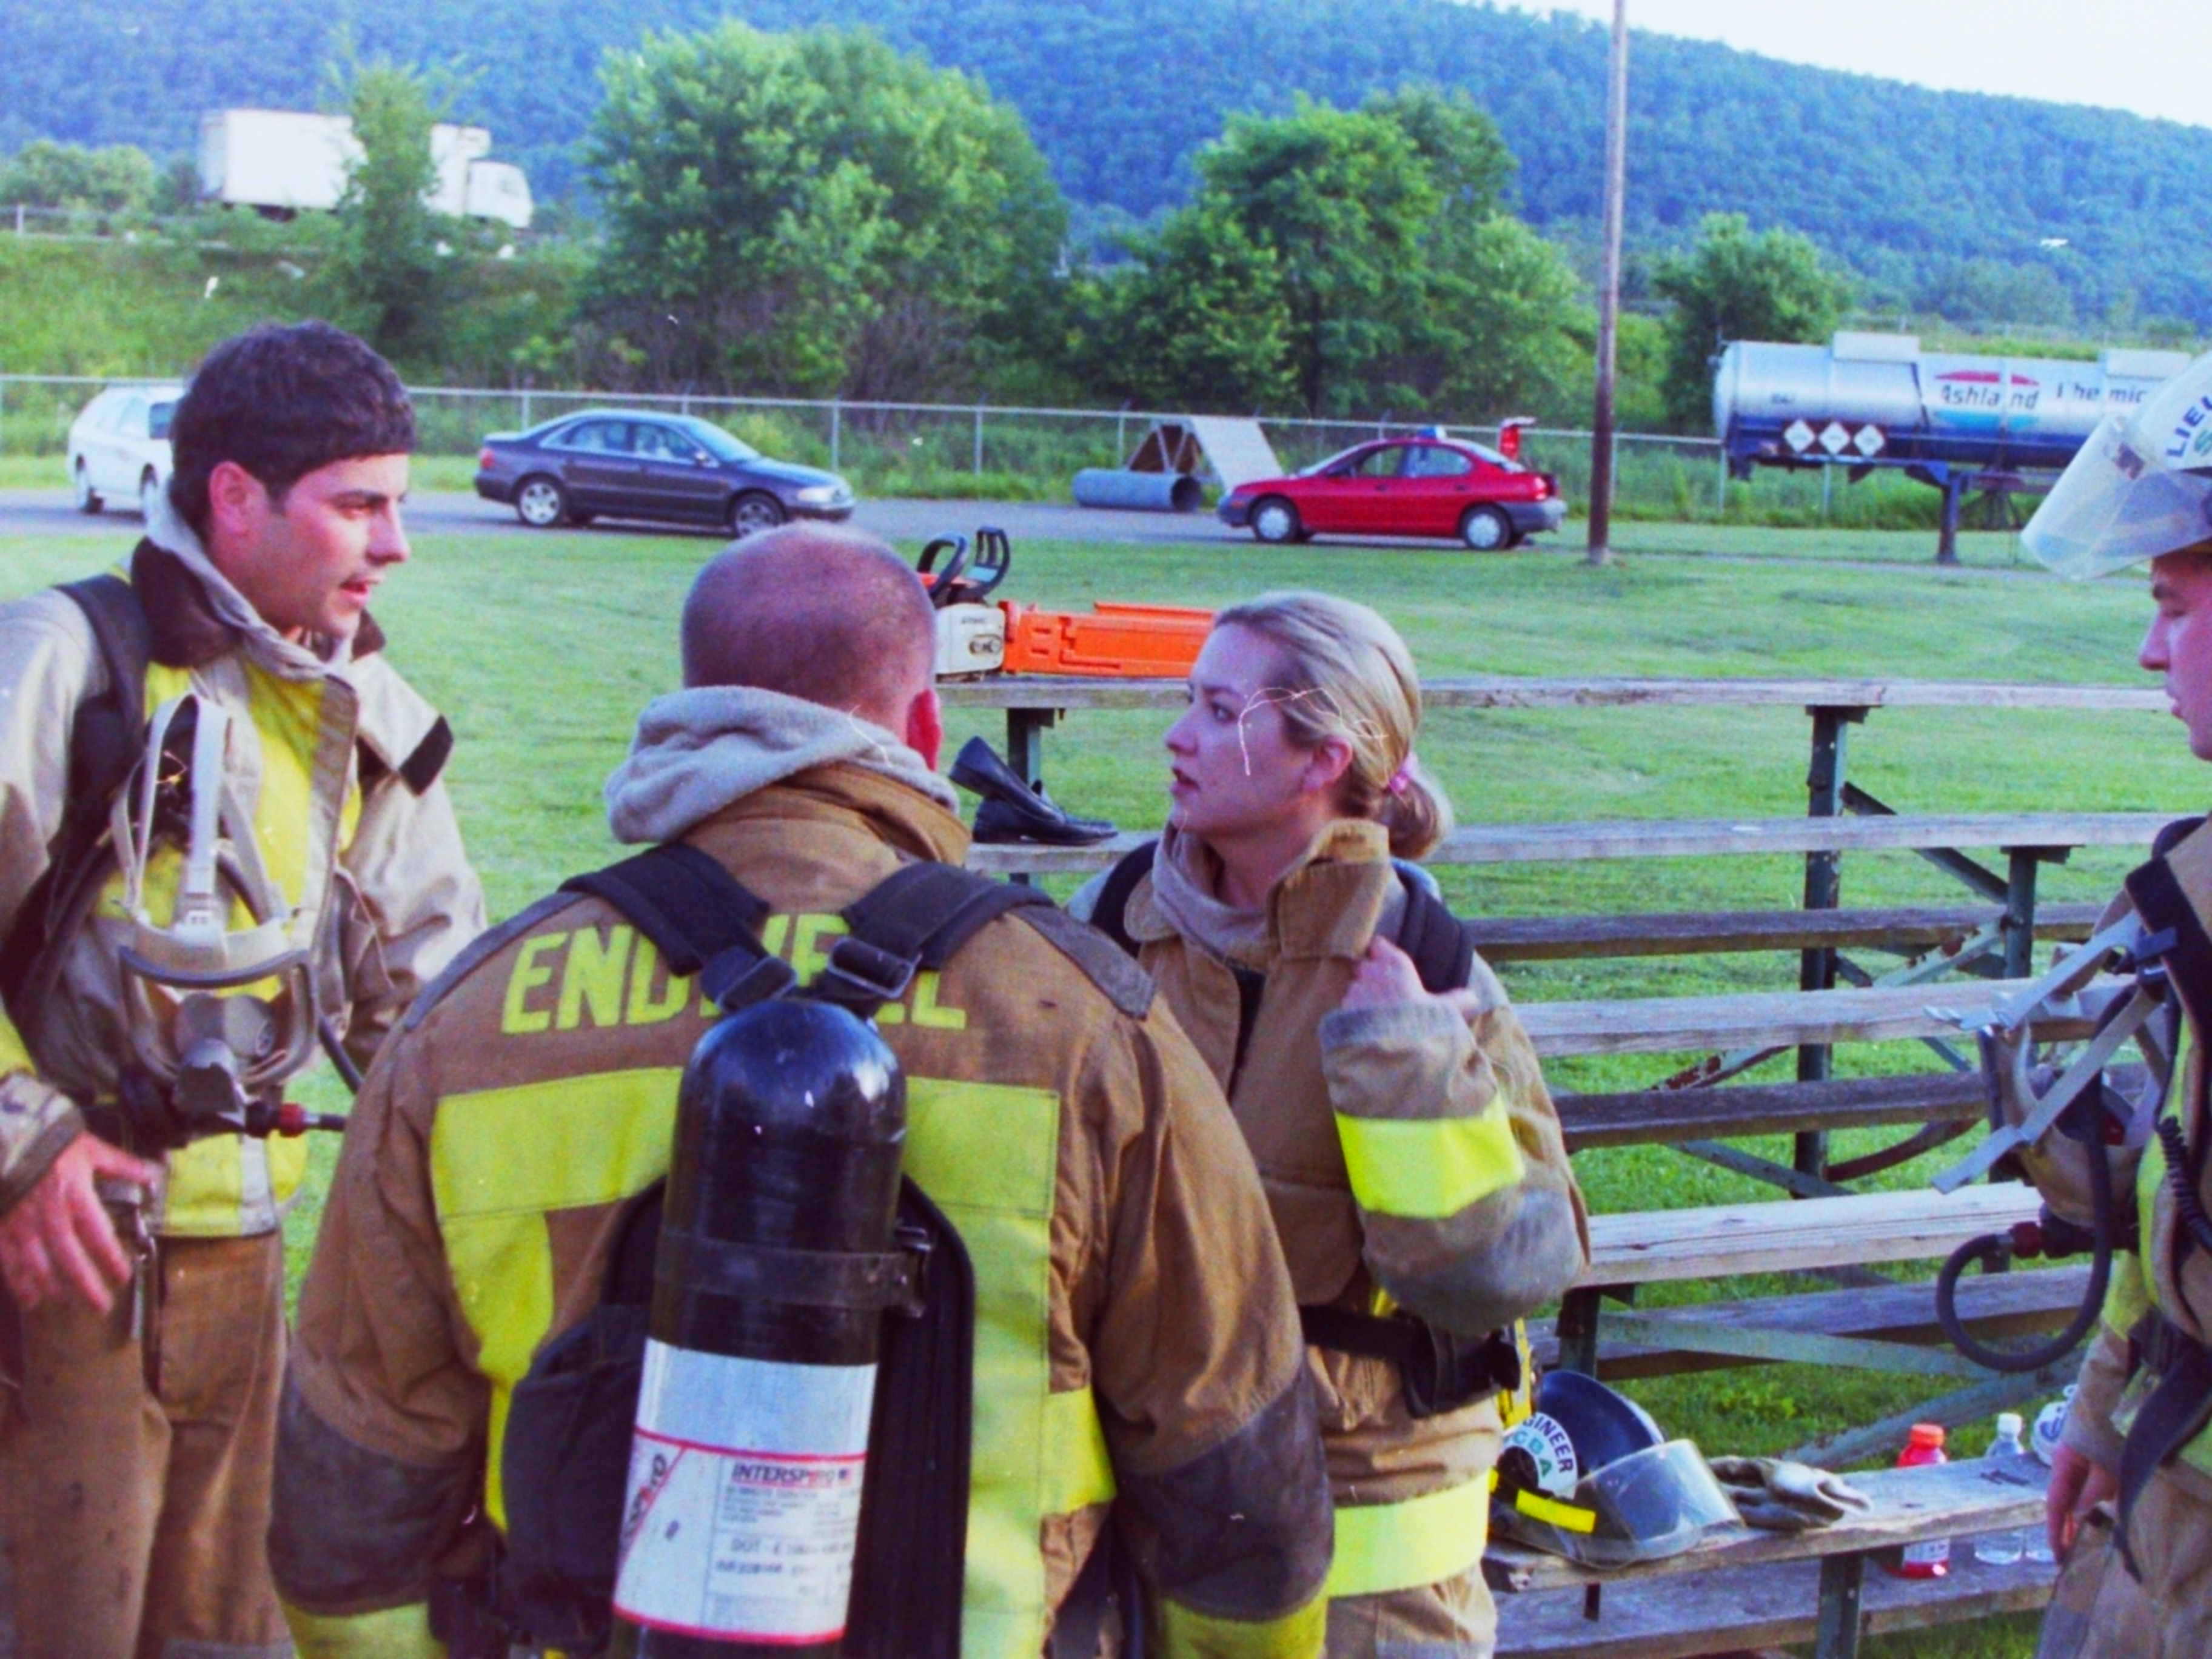 07-08-98  Training - Special Training With Thermal Imaging Camera